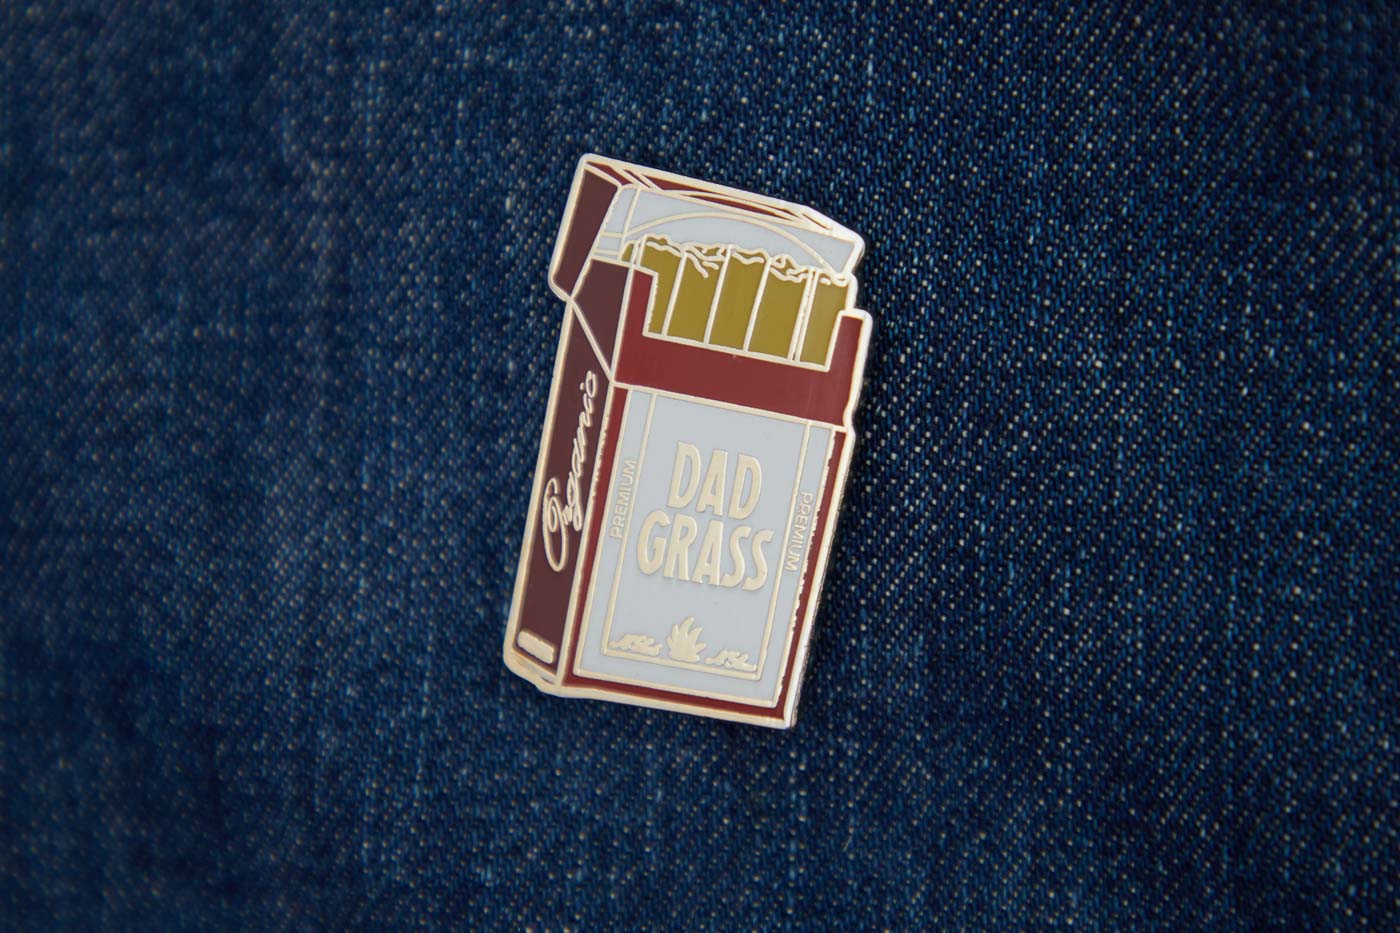 Dad Grass Pack Pin Best Price